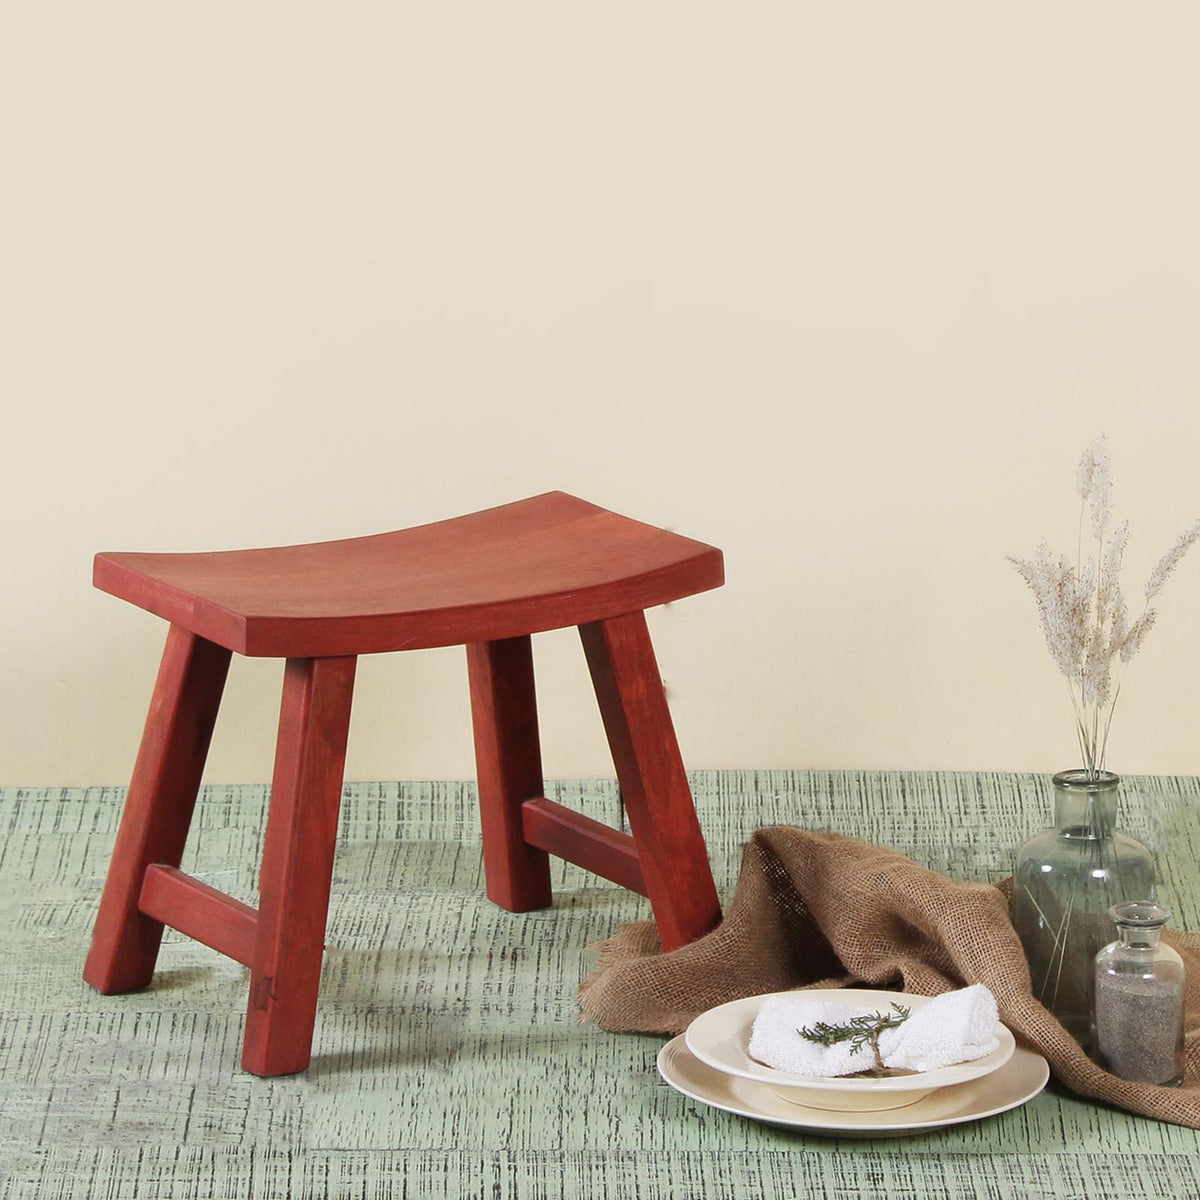 Vintage Red Wooden Stool